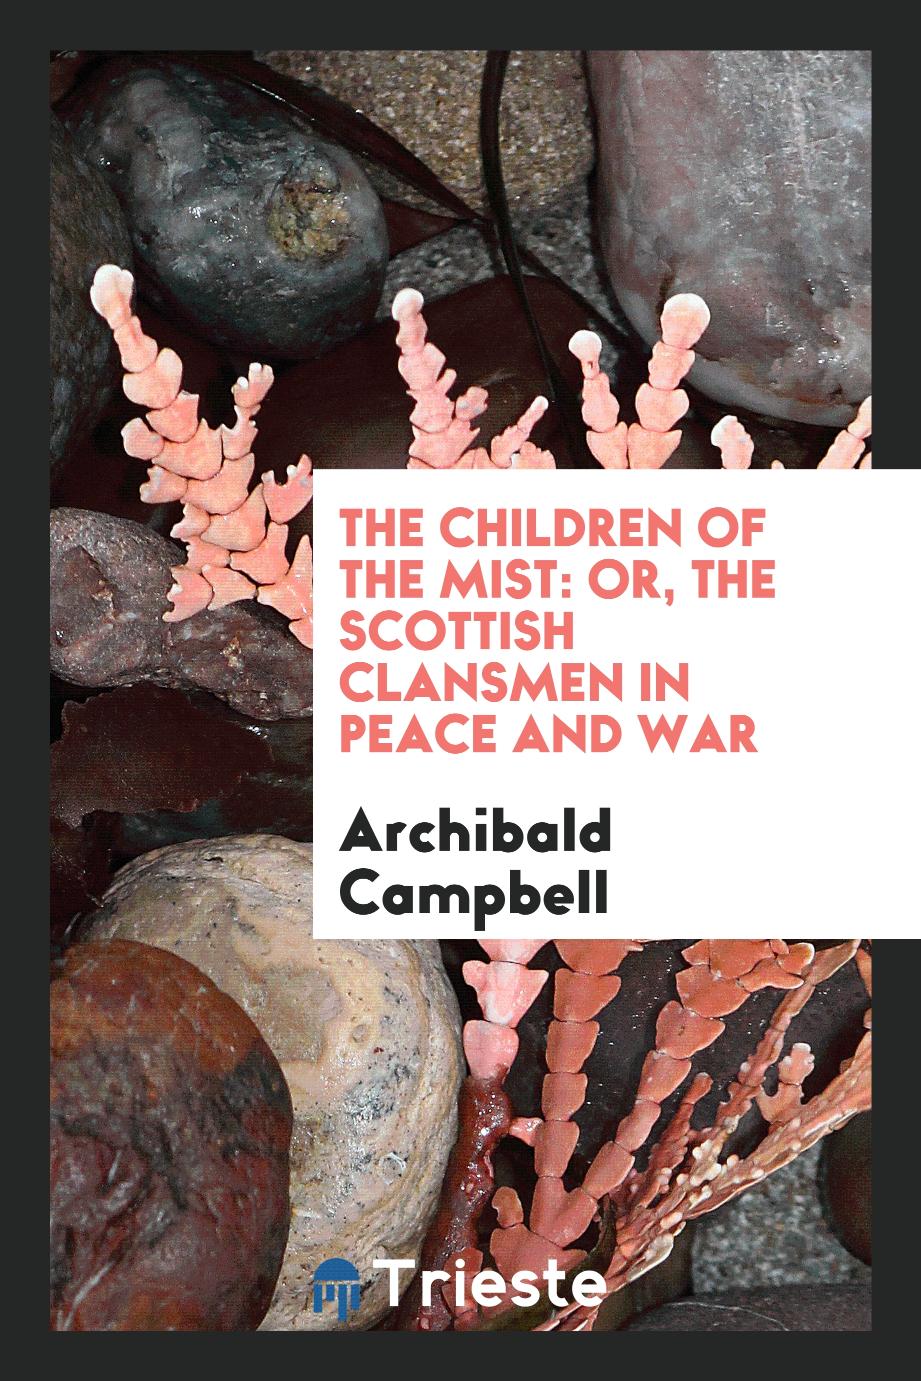 The Children of the Mist: Or, The Scottish Clansmen in Peace and War